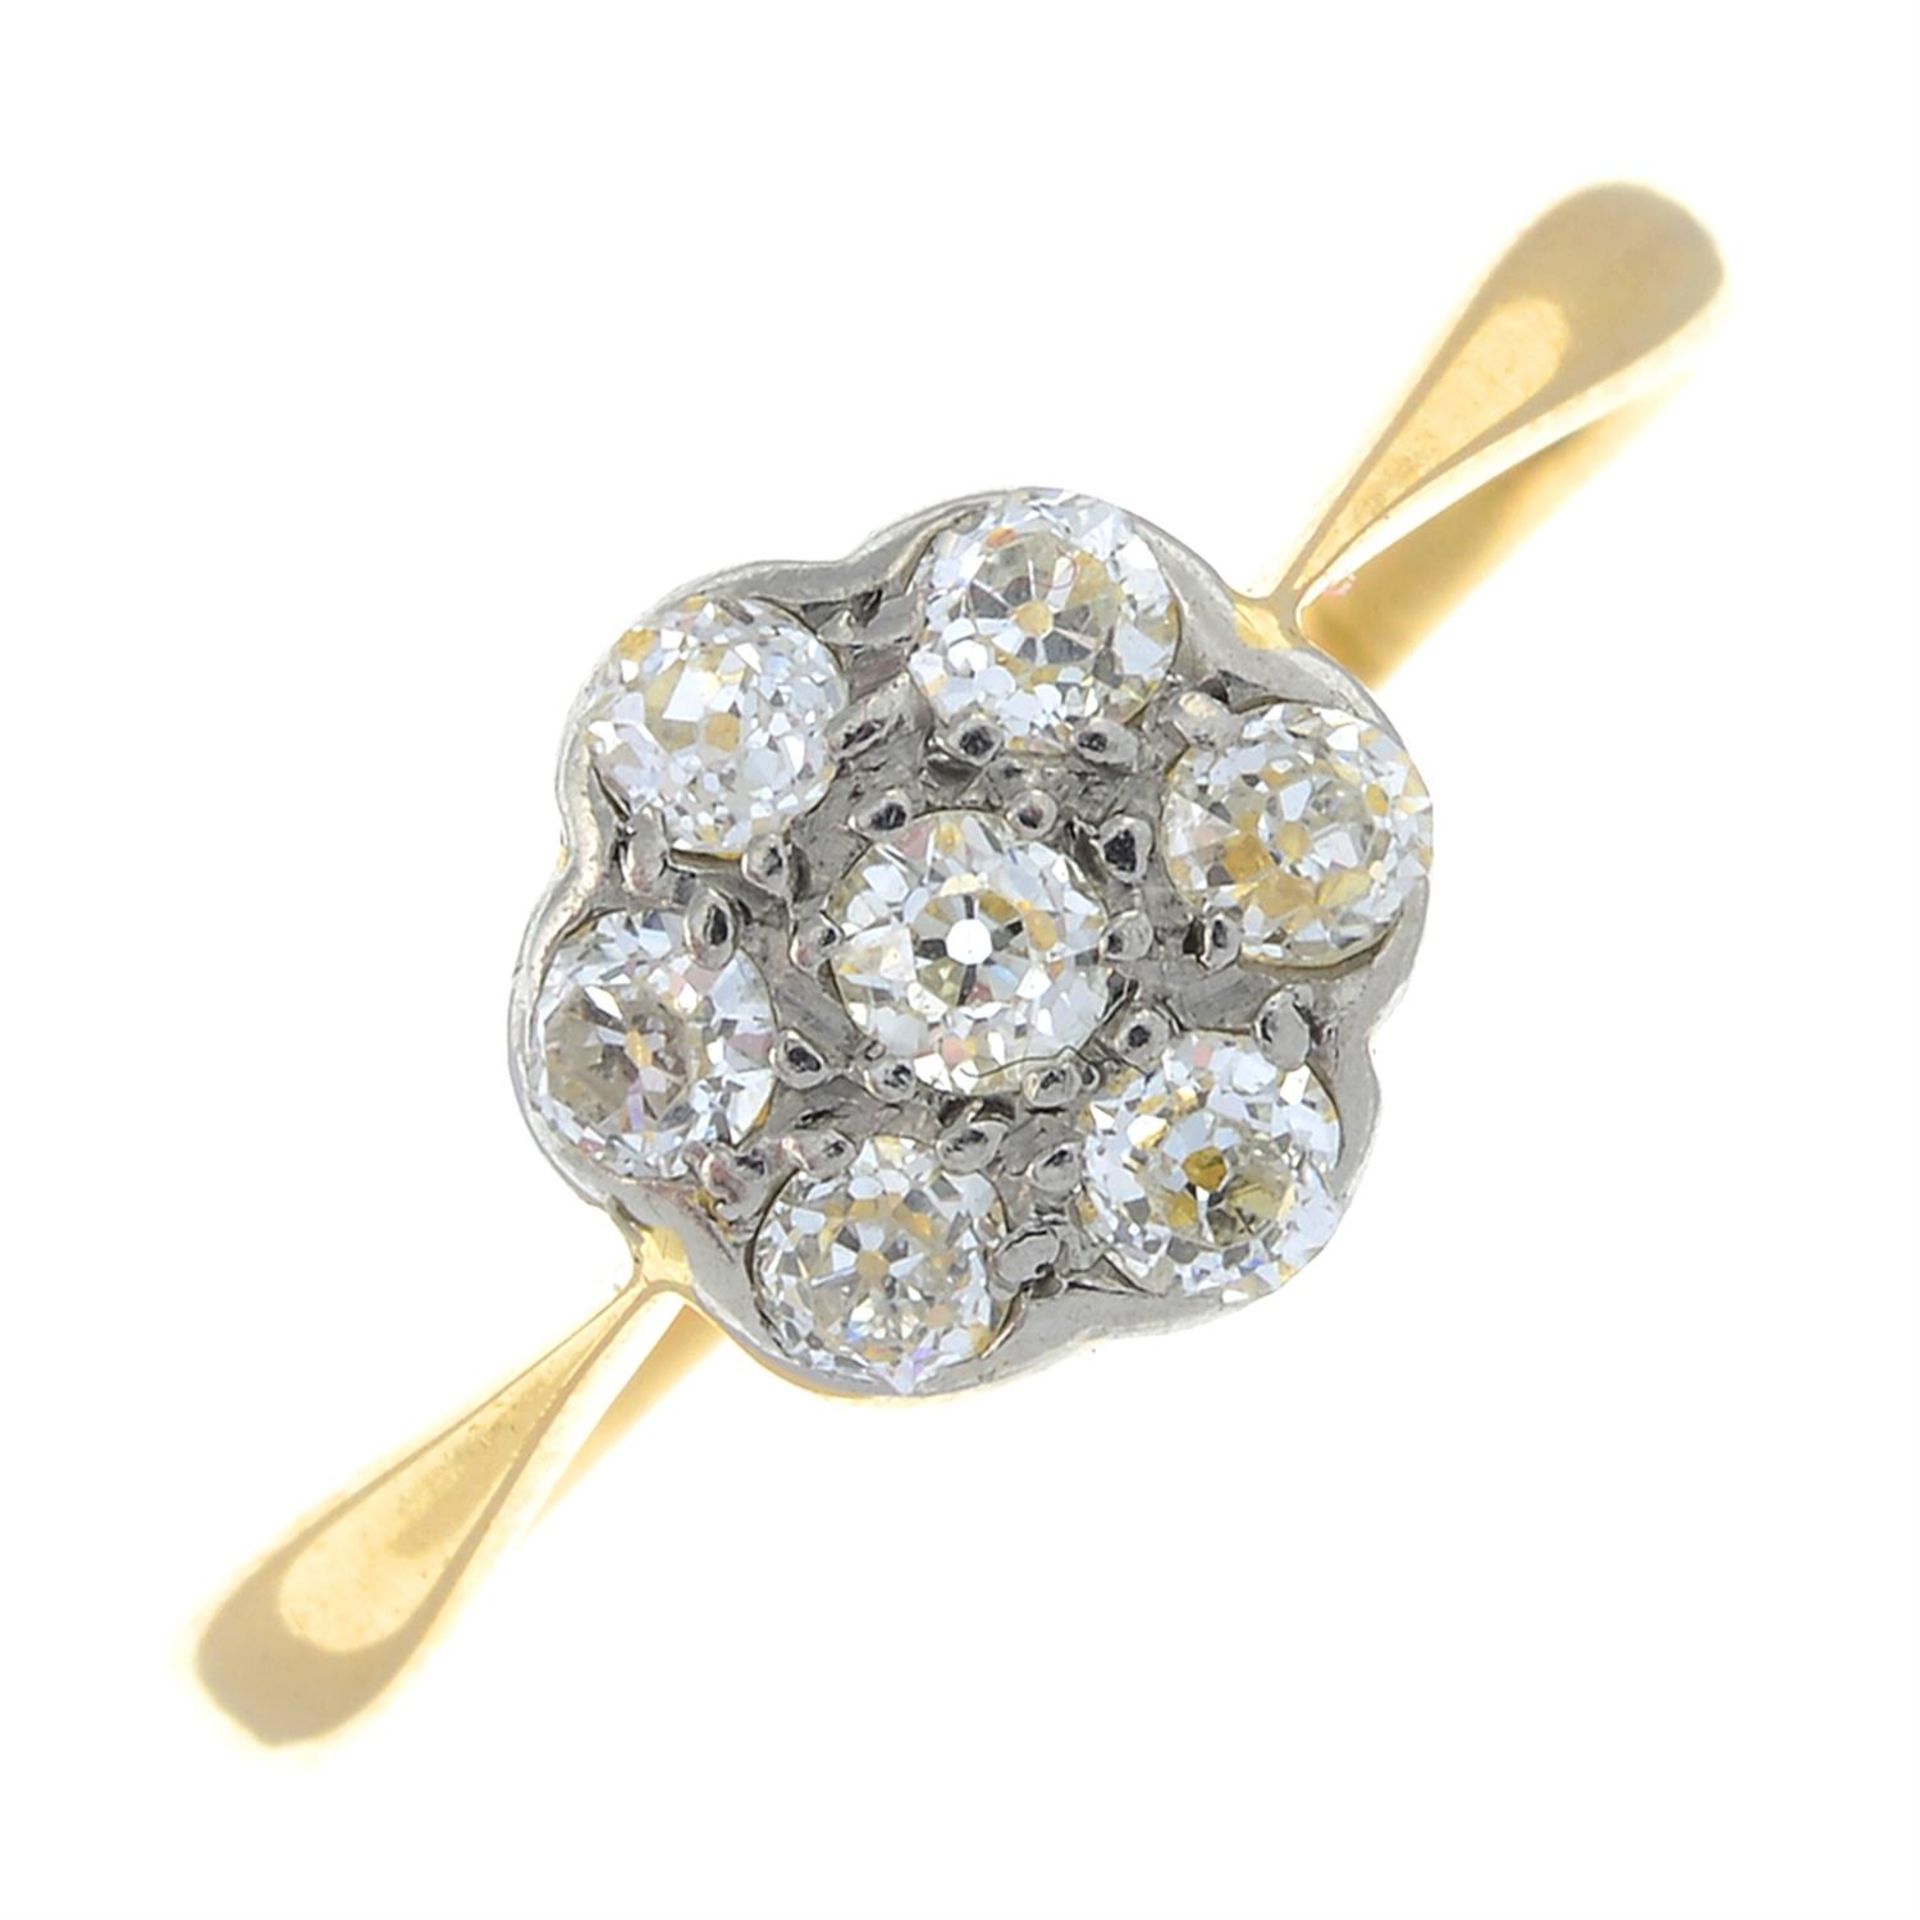 An 18ct gold old-cut diamond floral cluster ring.